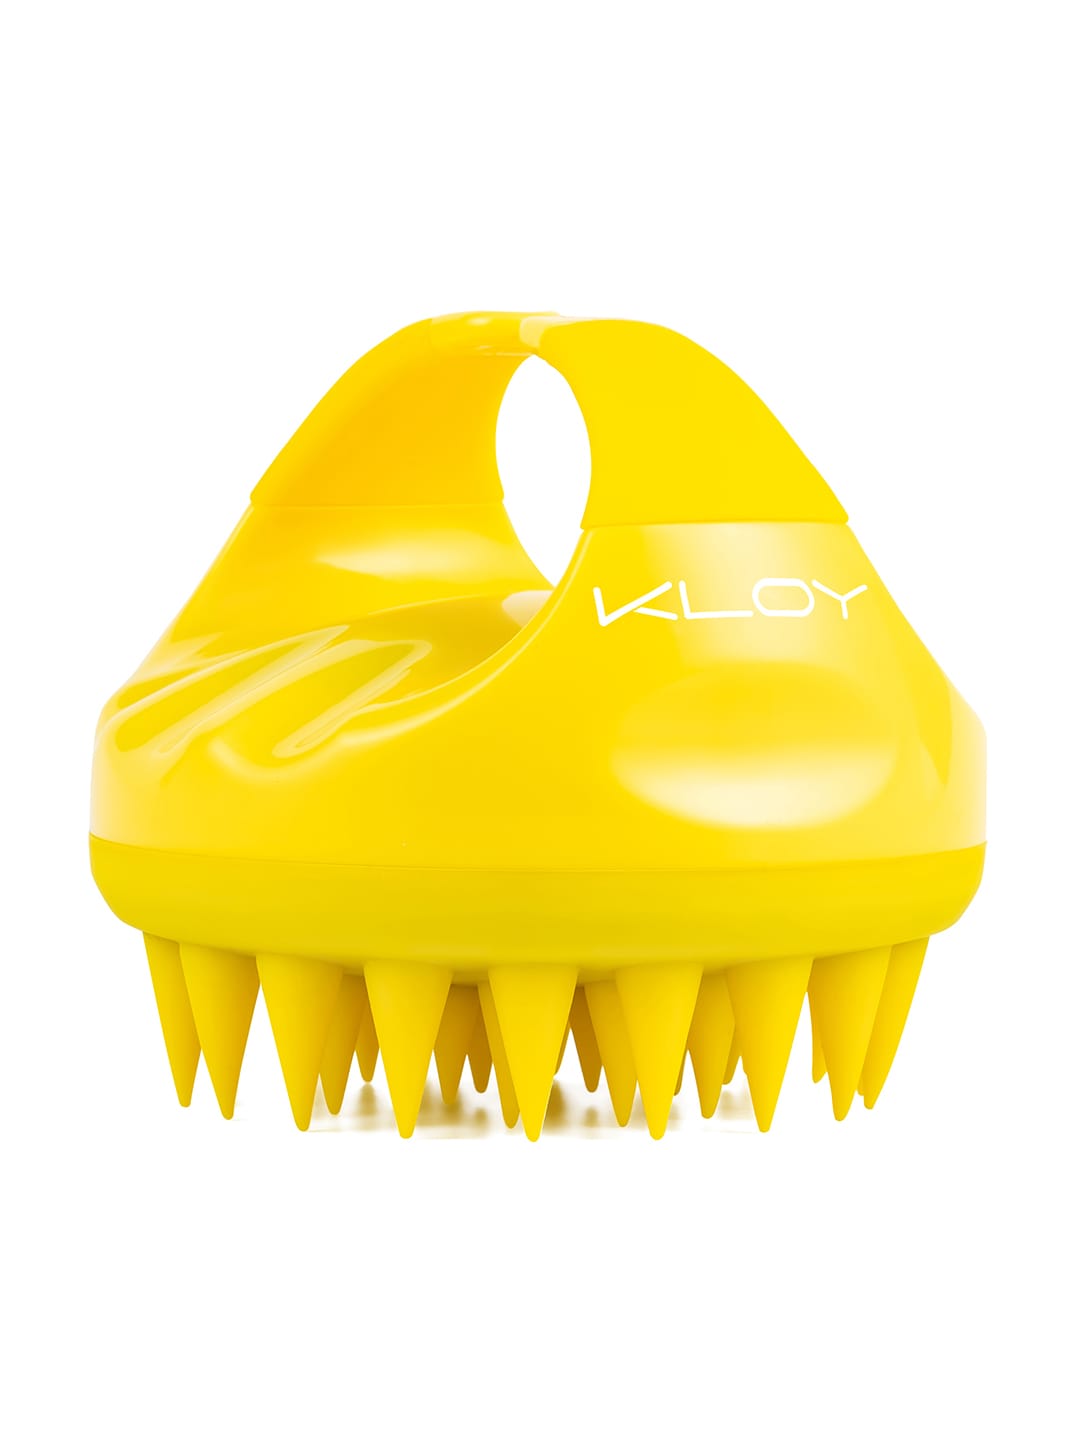 KLOY Yellow Hair Scalp Massager Exfoliator Shampoo Brush with Soft Silicone Bristles Price in India